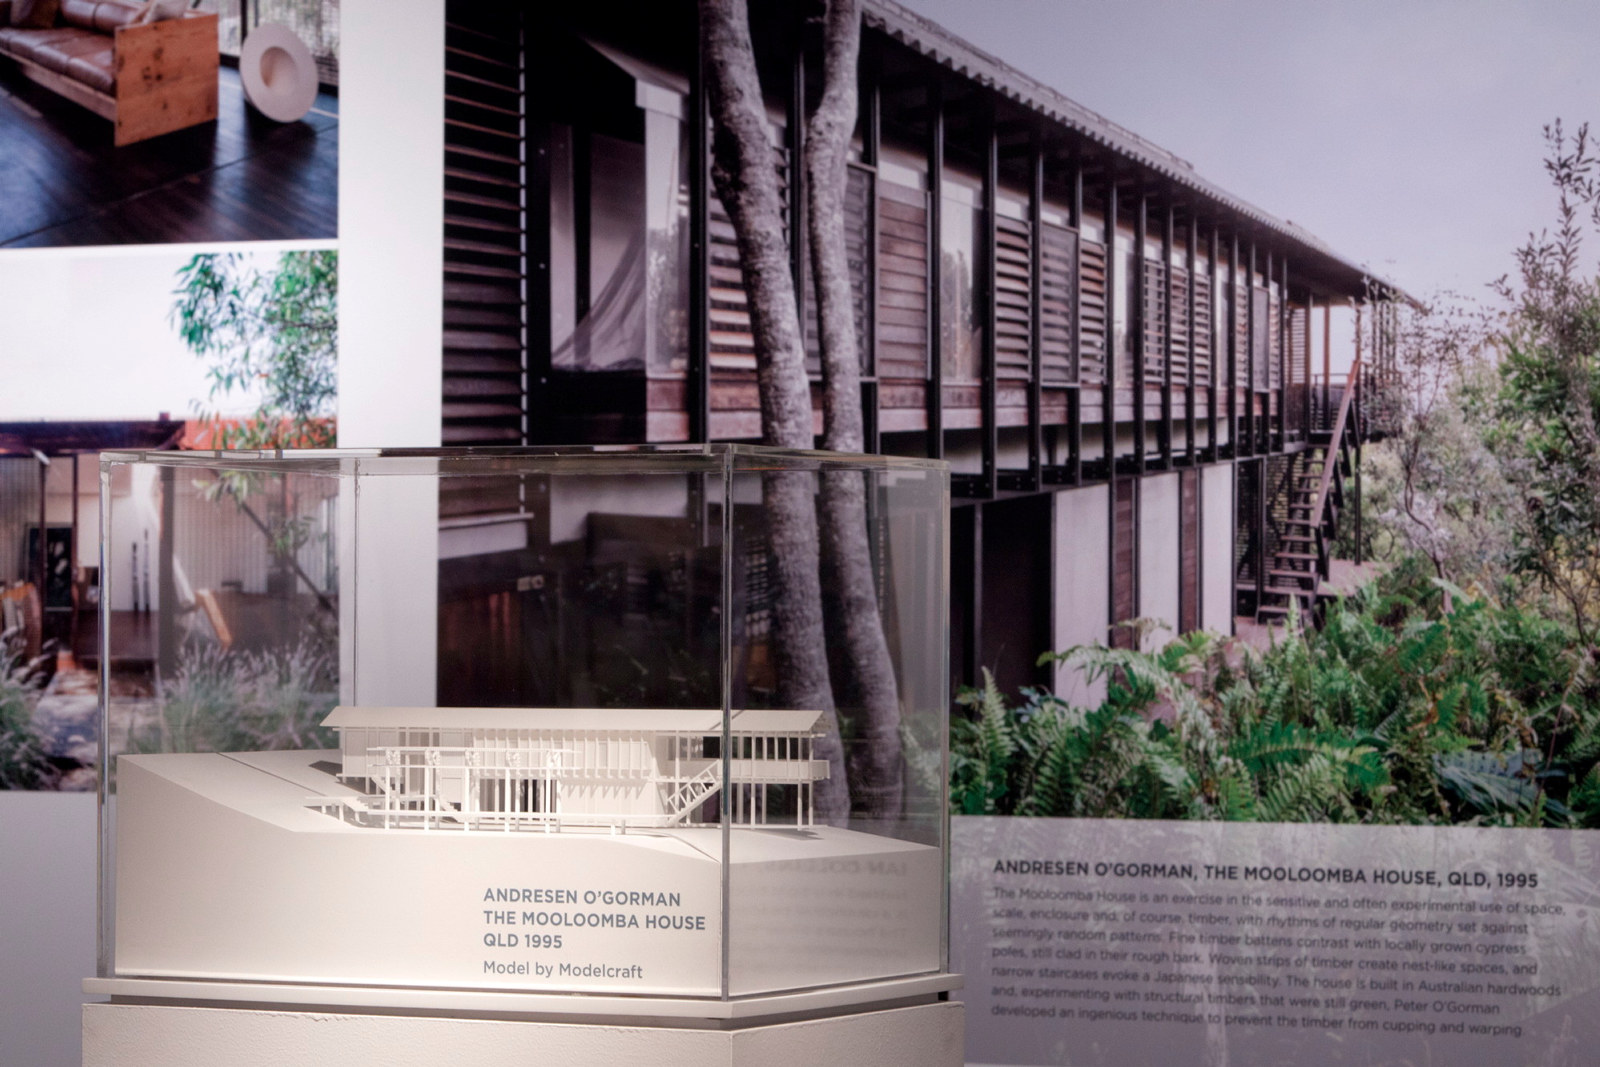 This is a photograph of a detailed architectural model in a case with a graphic panel of the house on the wall behind